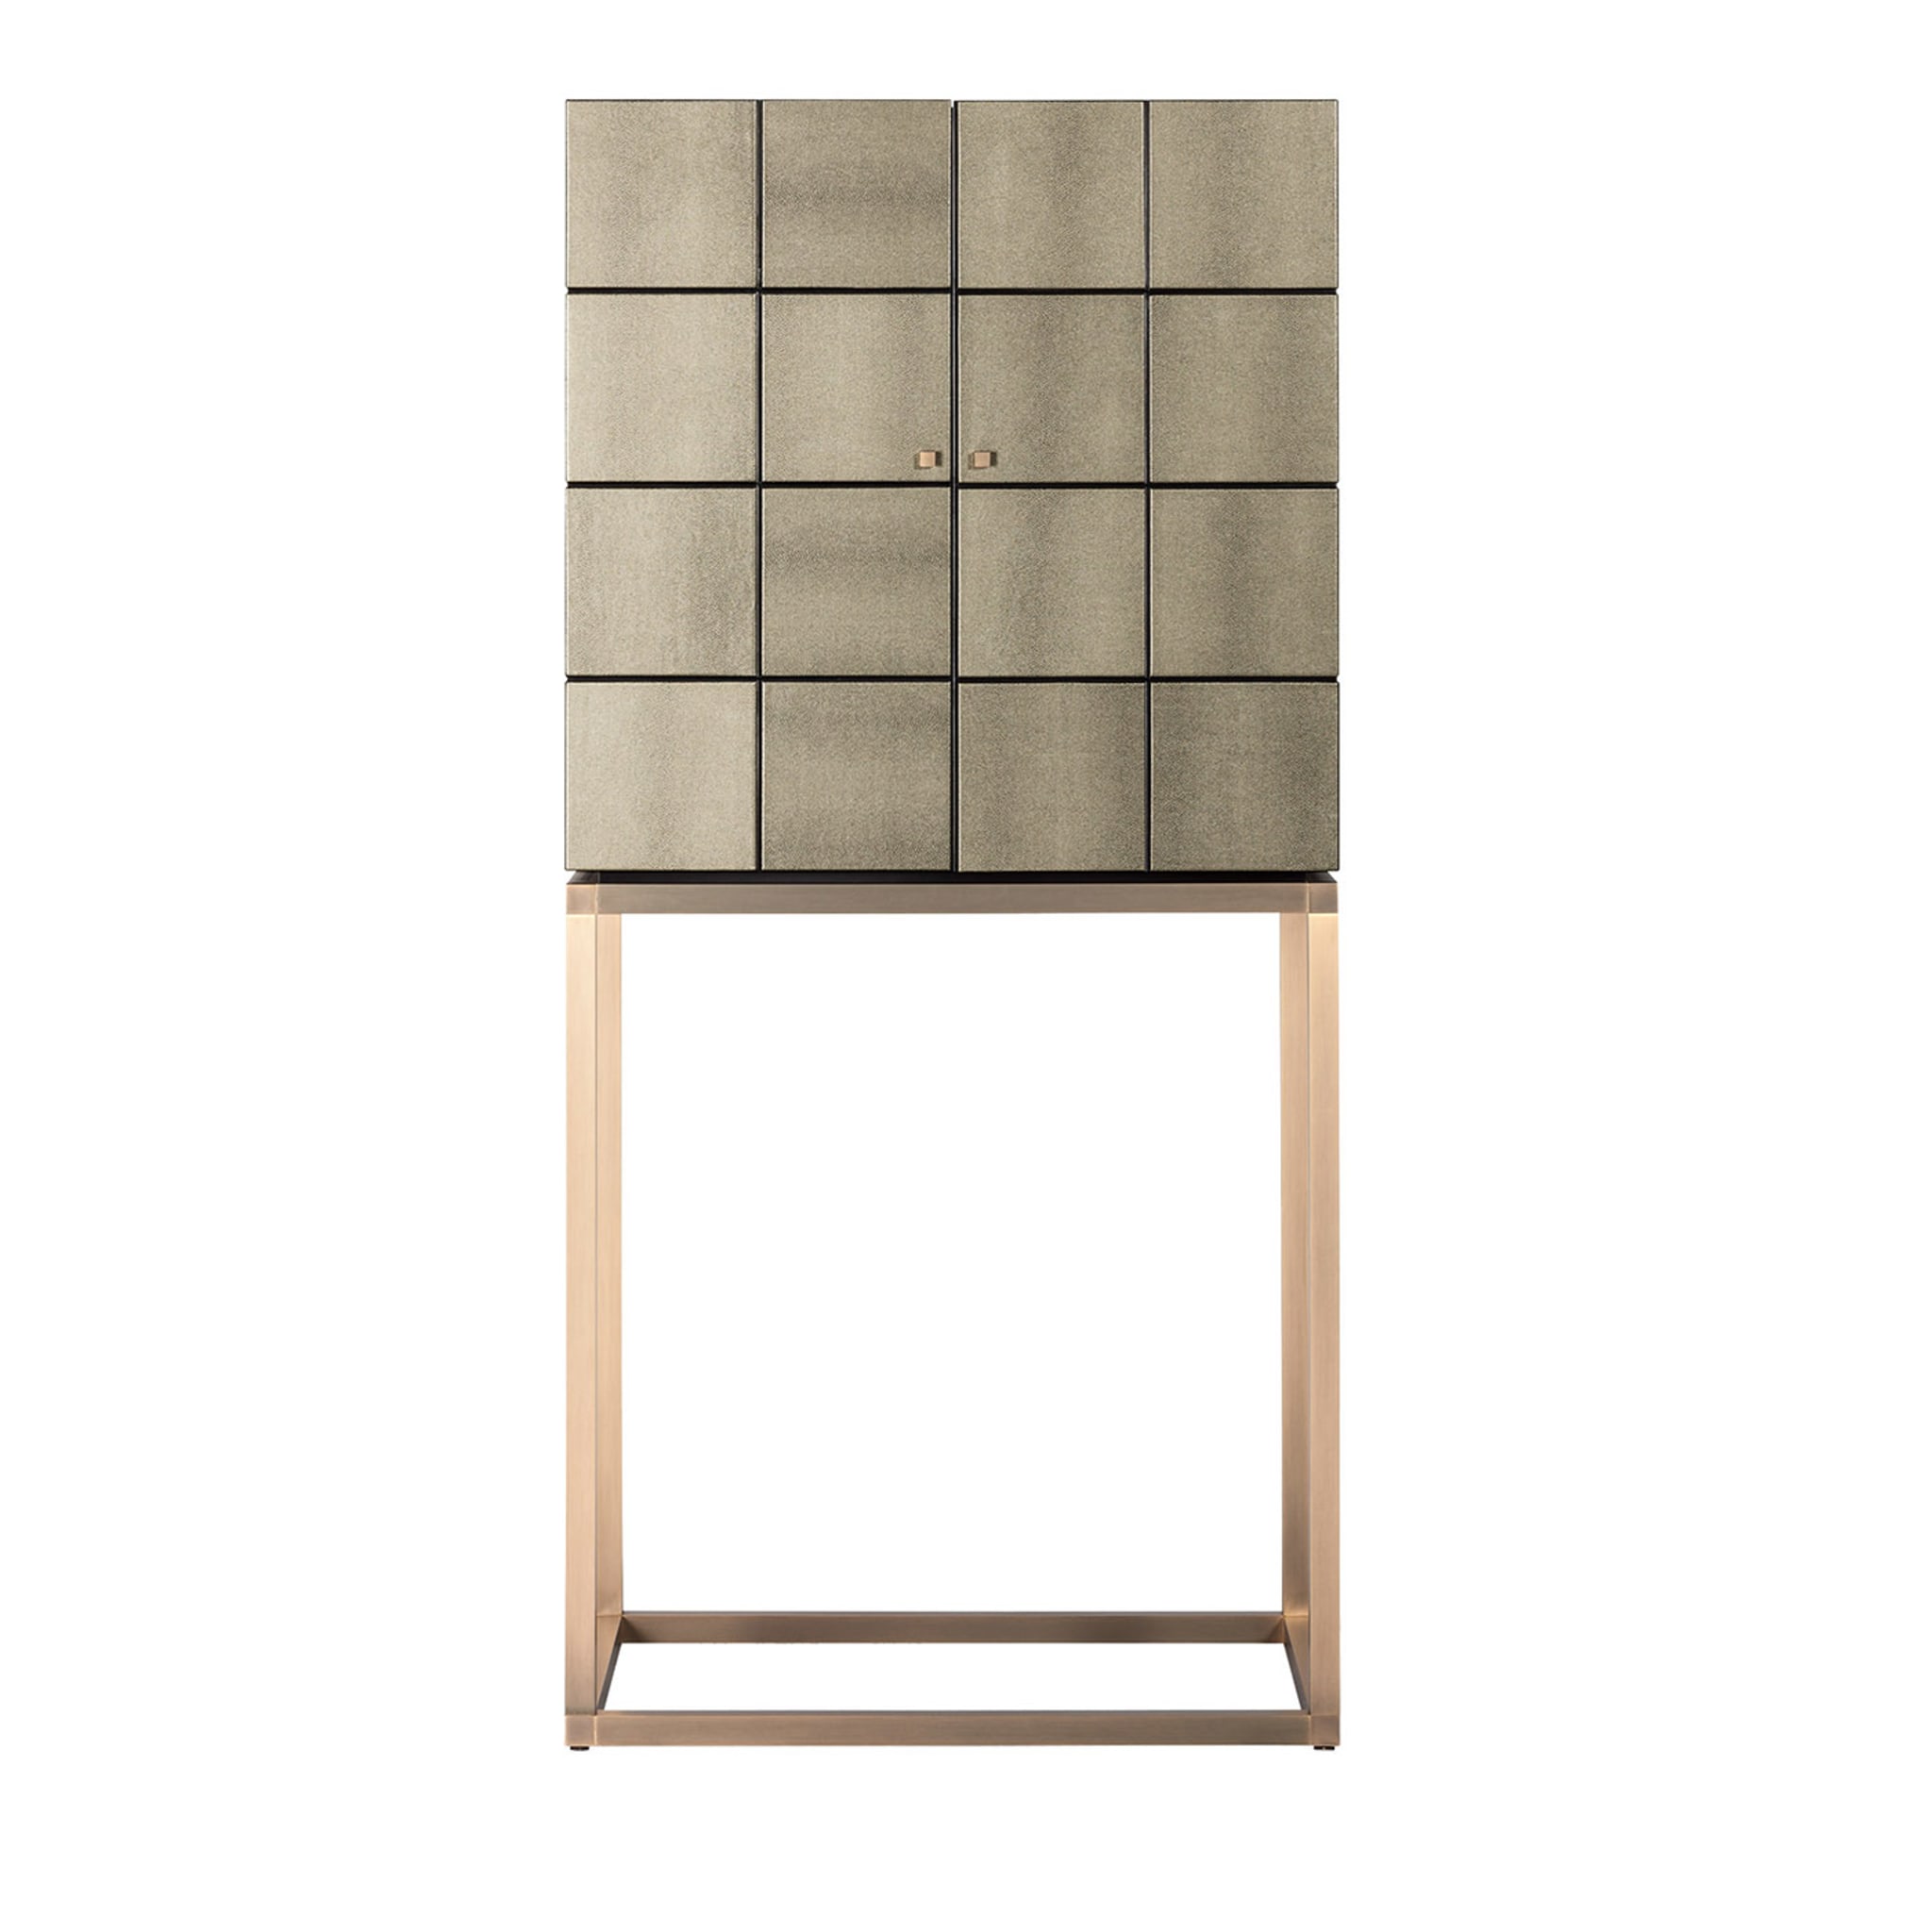 Riesling Bar Cabinet Technical Shagreen Fabric - Main view